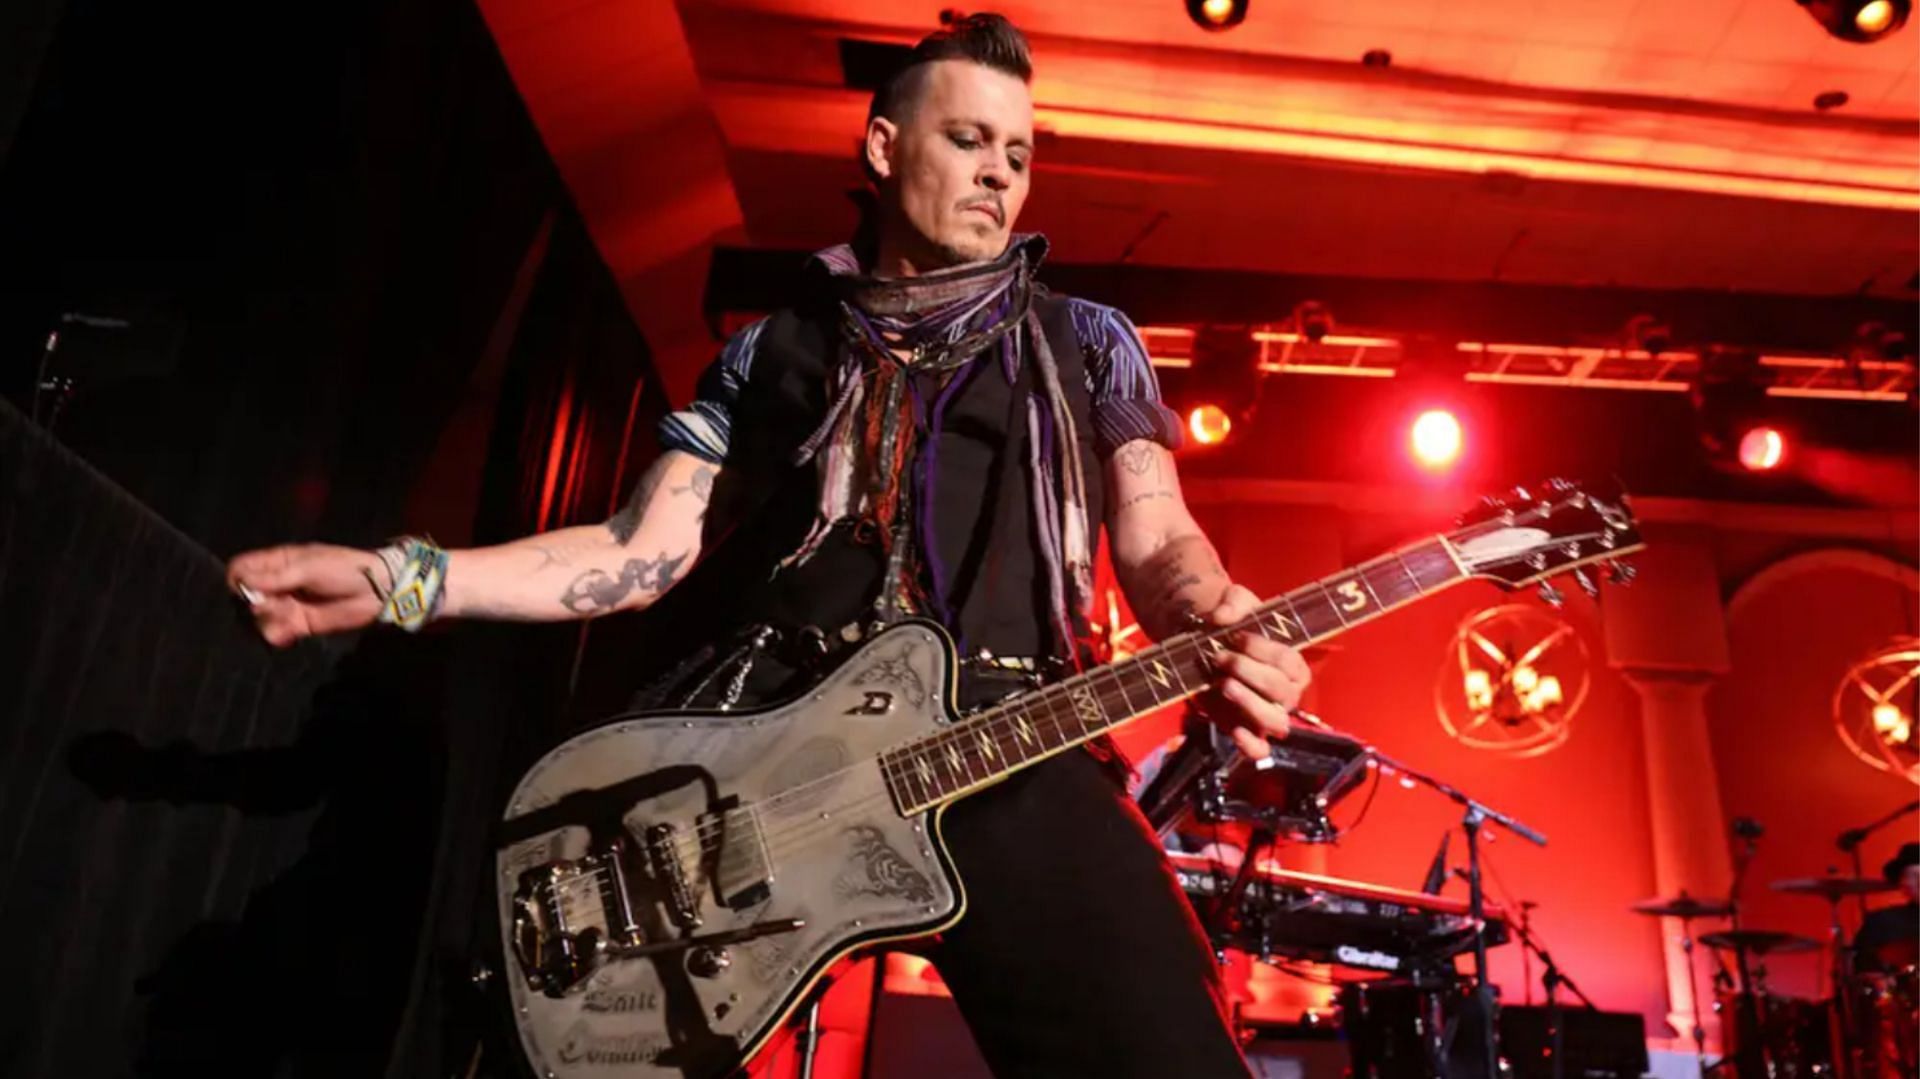 Johnny Depp founded a supergroup called Hollywood Vampires in 2015. (Image via Getty Images/Adam Bettcher)